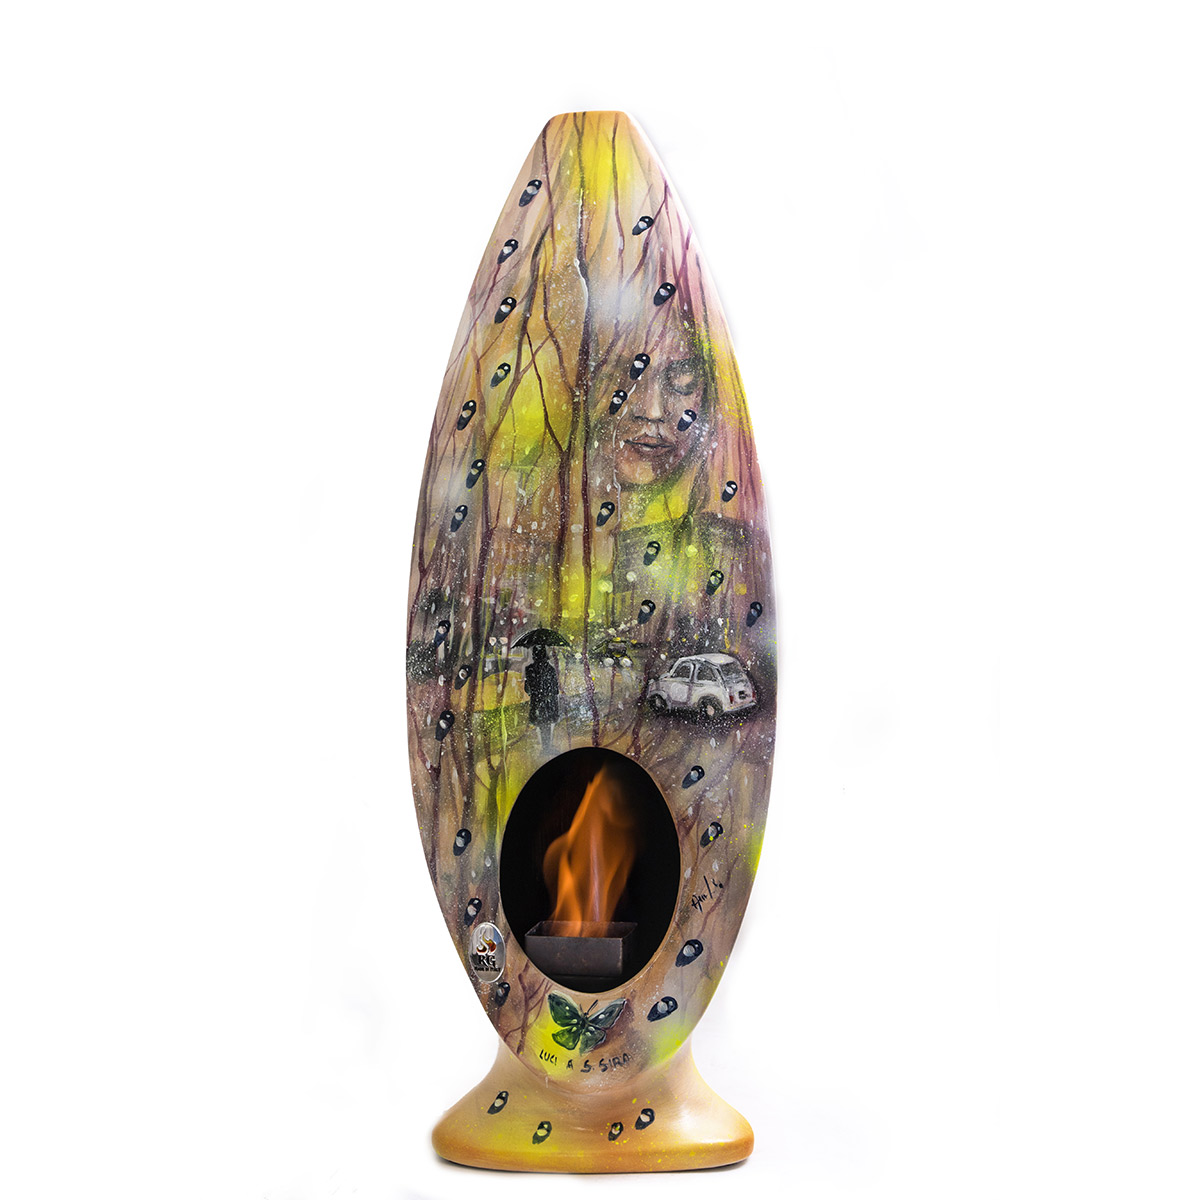 Bio-Fireplace MUSIC -  Alessandro Romagnoli - Handcrafted and artistic bio-fireplaces